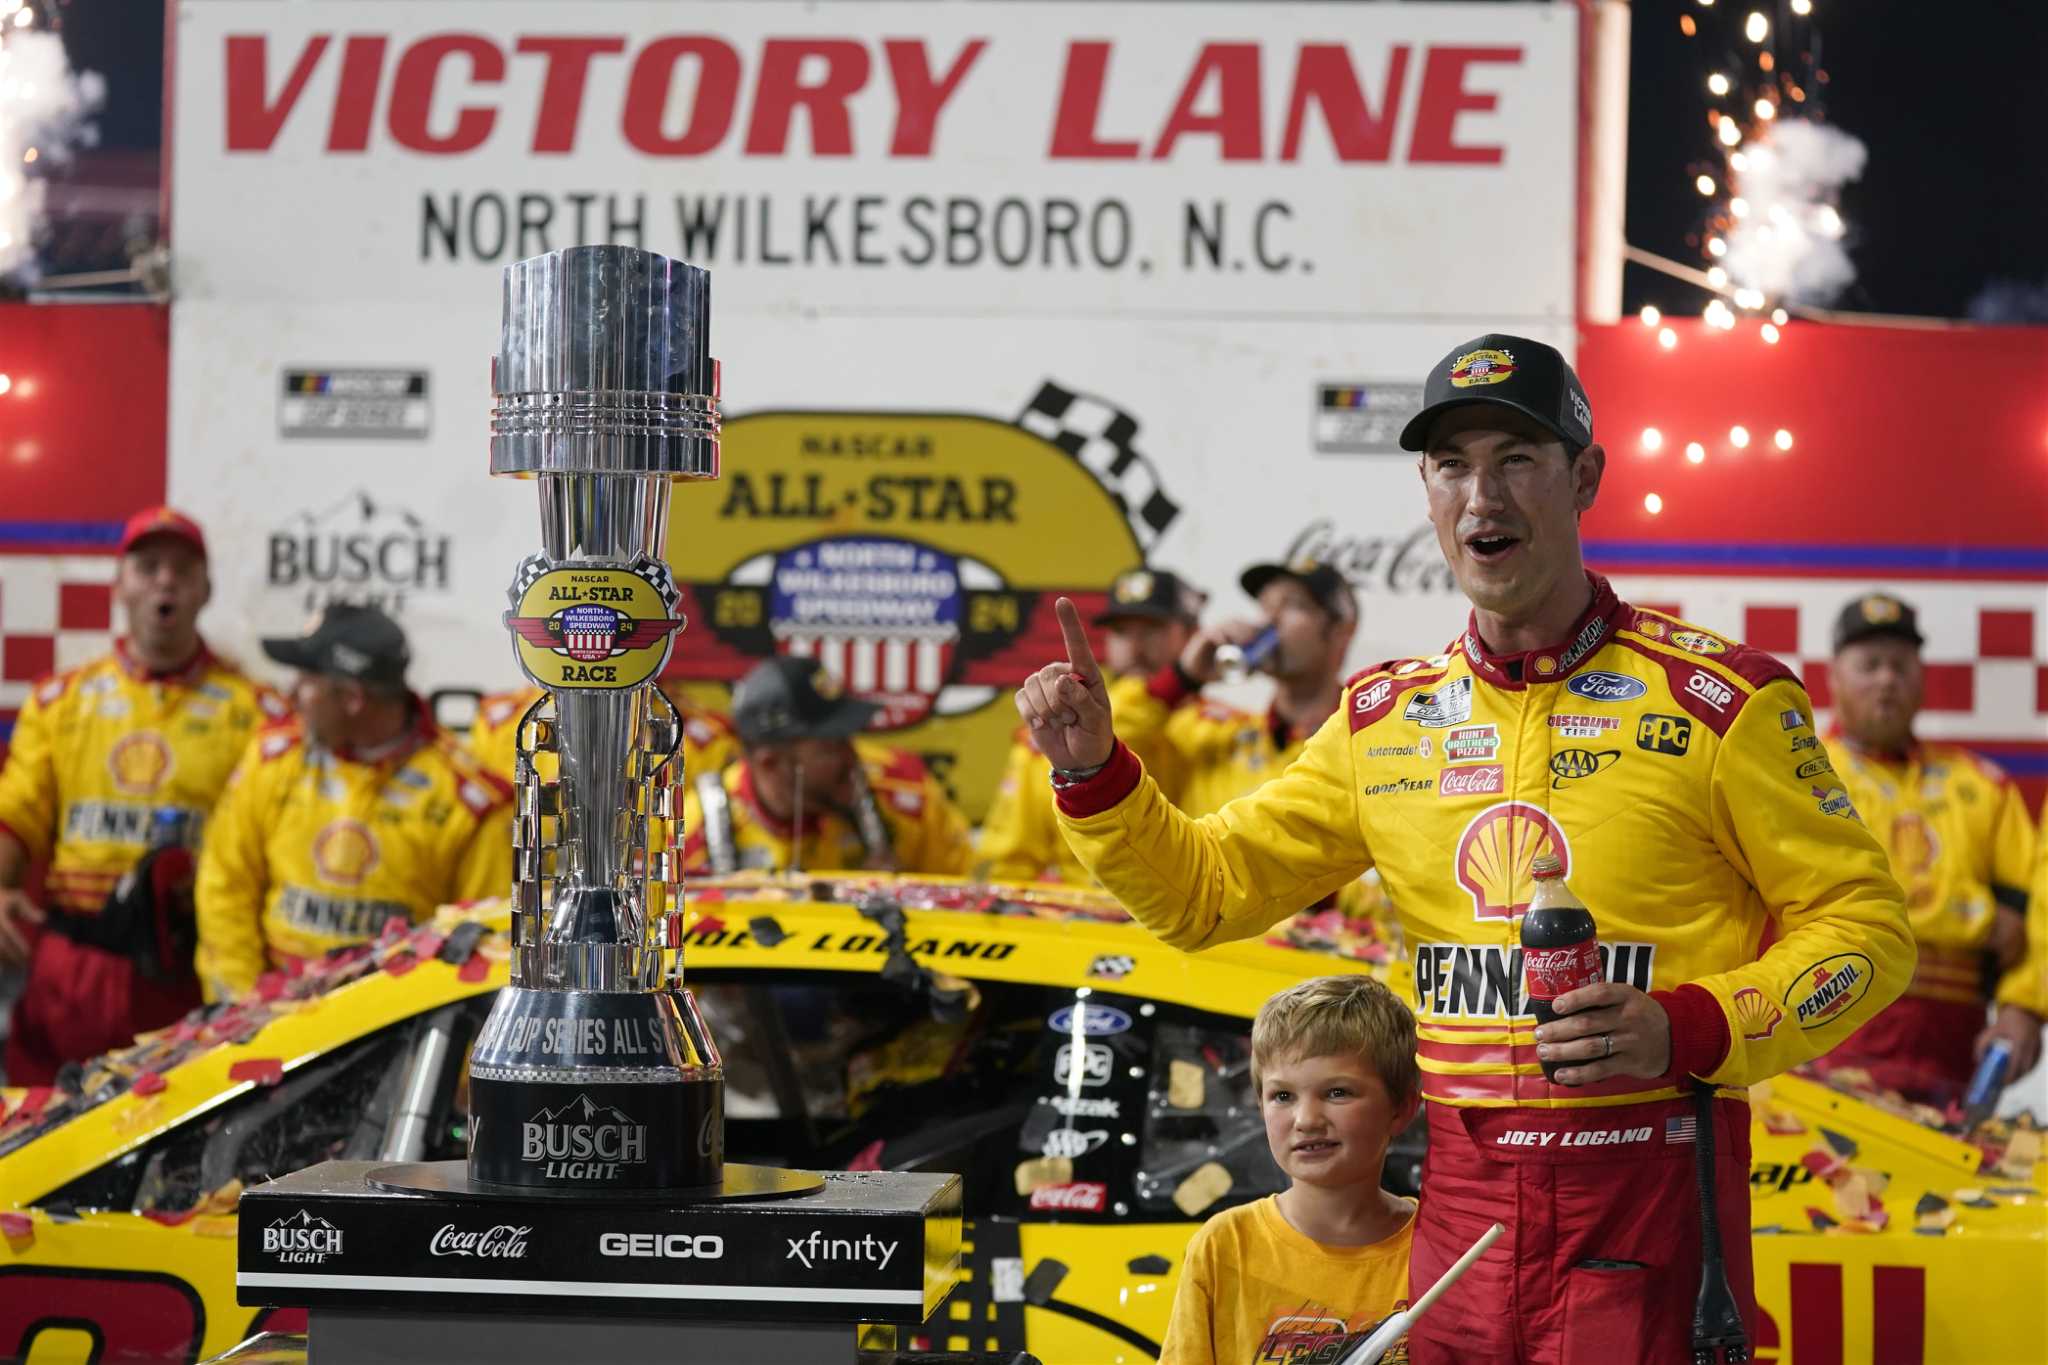 Joey Logano hopes All-Star Race victory will help his team climb out of hole in Cup Series standings